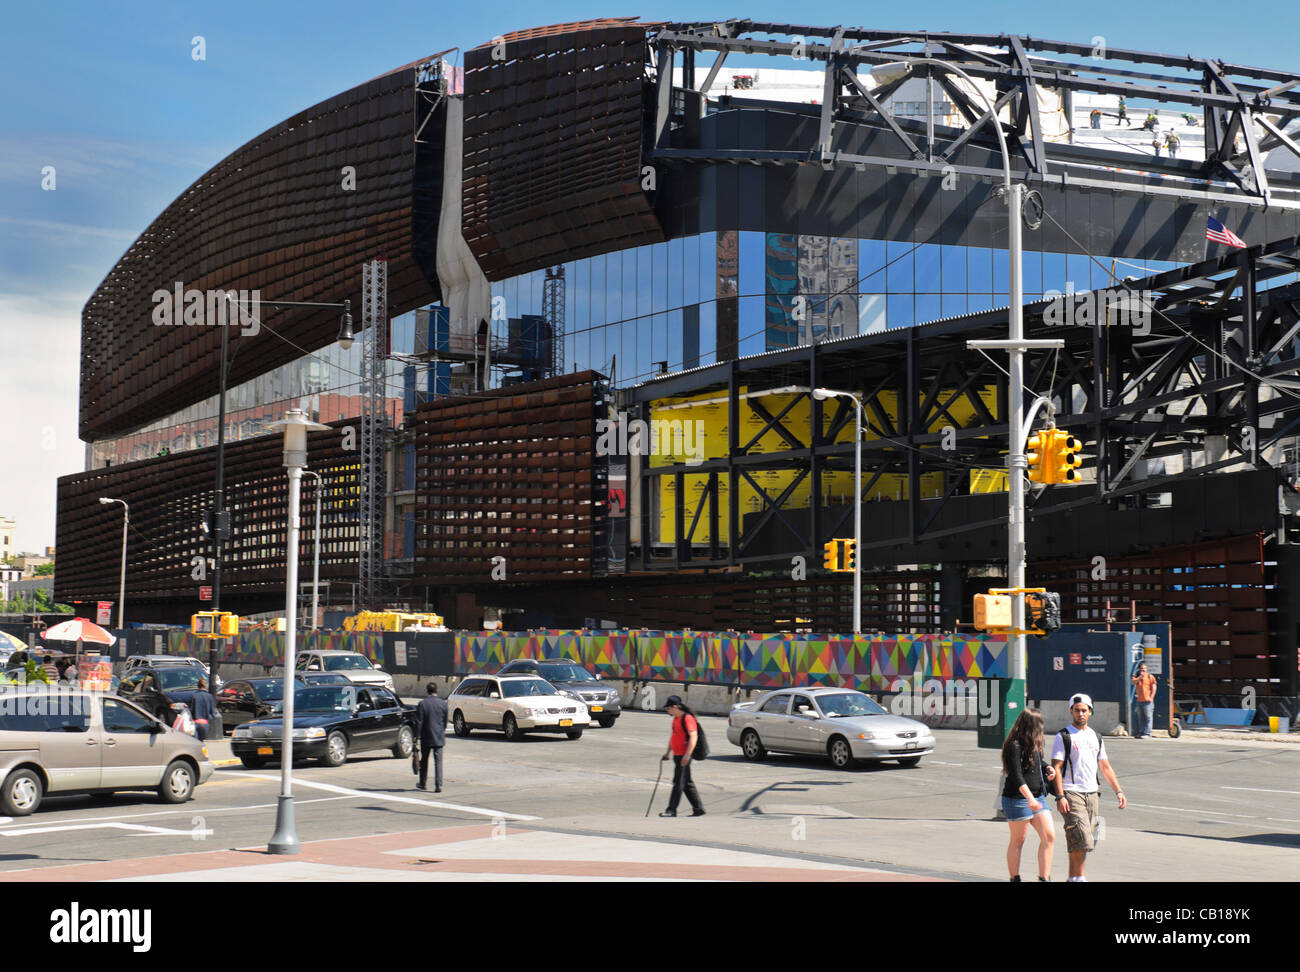 New York - May 18, 2012 The Barclays Center at Atlantic Yards, new home of the newly renamed Brooklyn Nets basketball team, during construction.  The 18,000 seat arena in Brooklyn New York opens October 3, 2012 with a sold out inaugural concert by Jay Z. Stock Photo